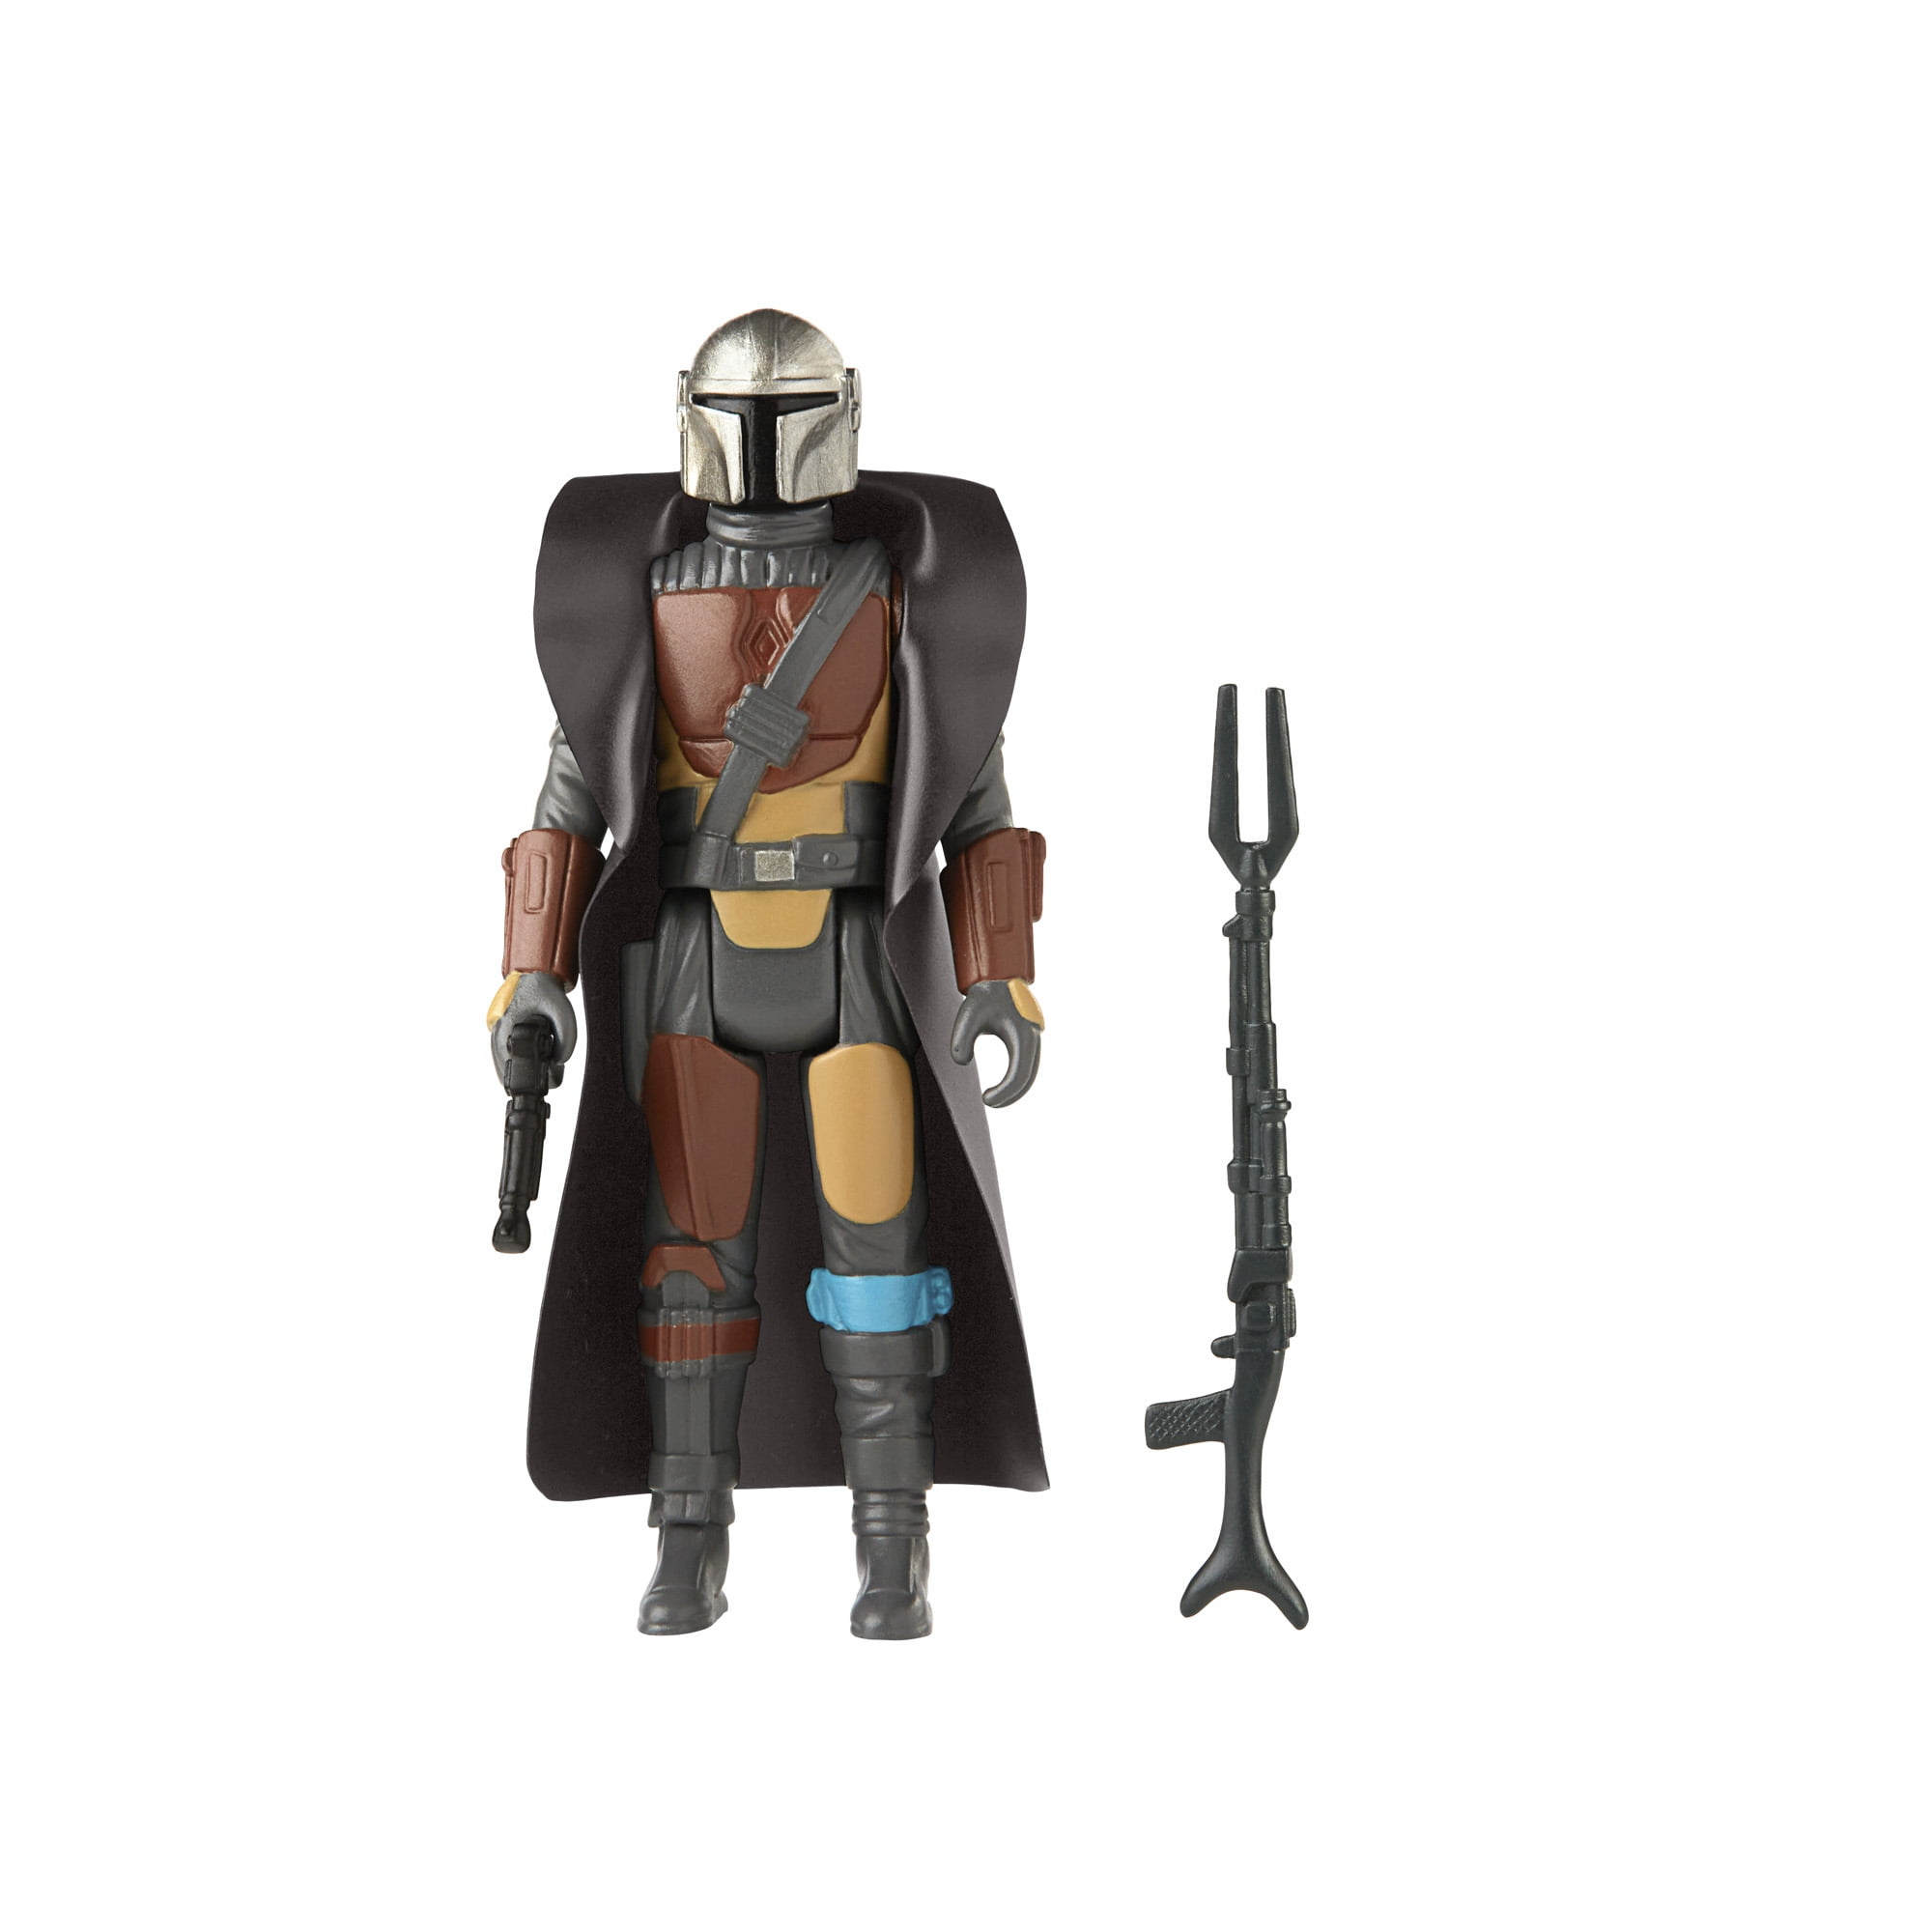 Kenner Star Wars Vintage Collection The Mandalorian 3.75” Action Figurine New 